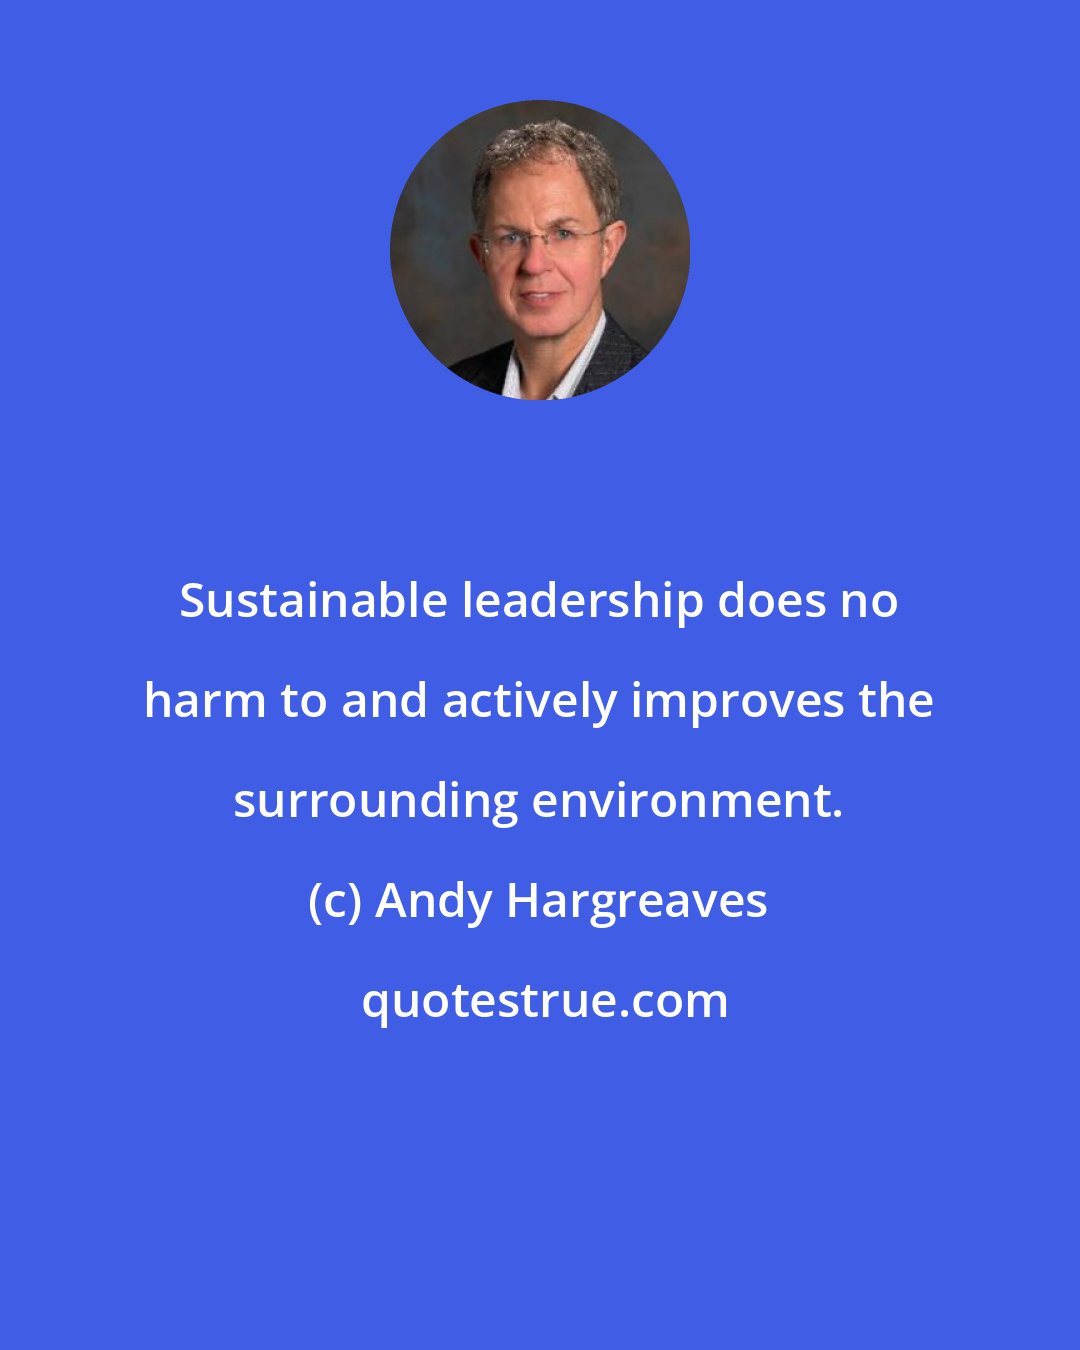 Andy Hargreaves: Sustainable leadership does no harm to and actively improves the surrounding environment.